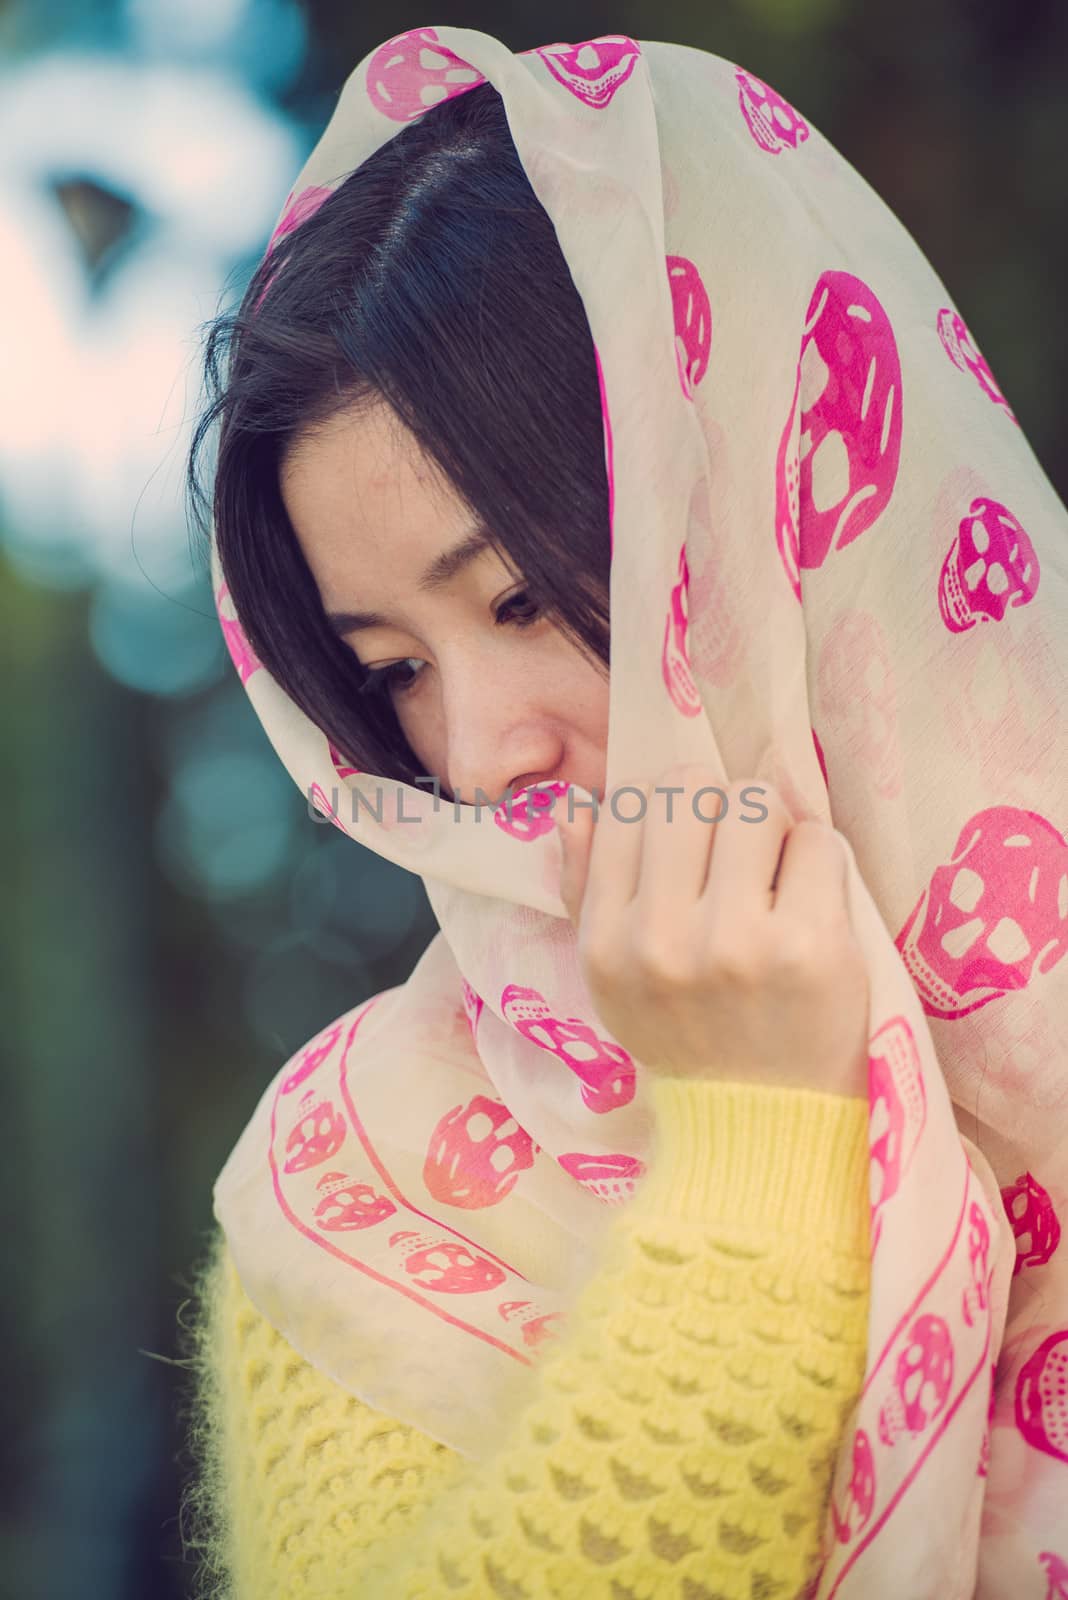 Girl with scarf covering head by IVYPHOTOS